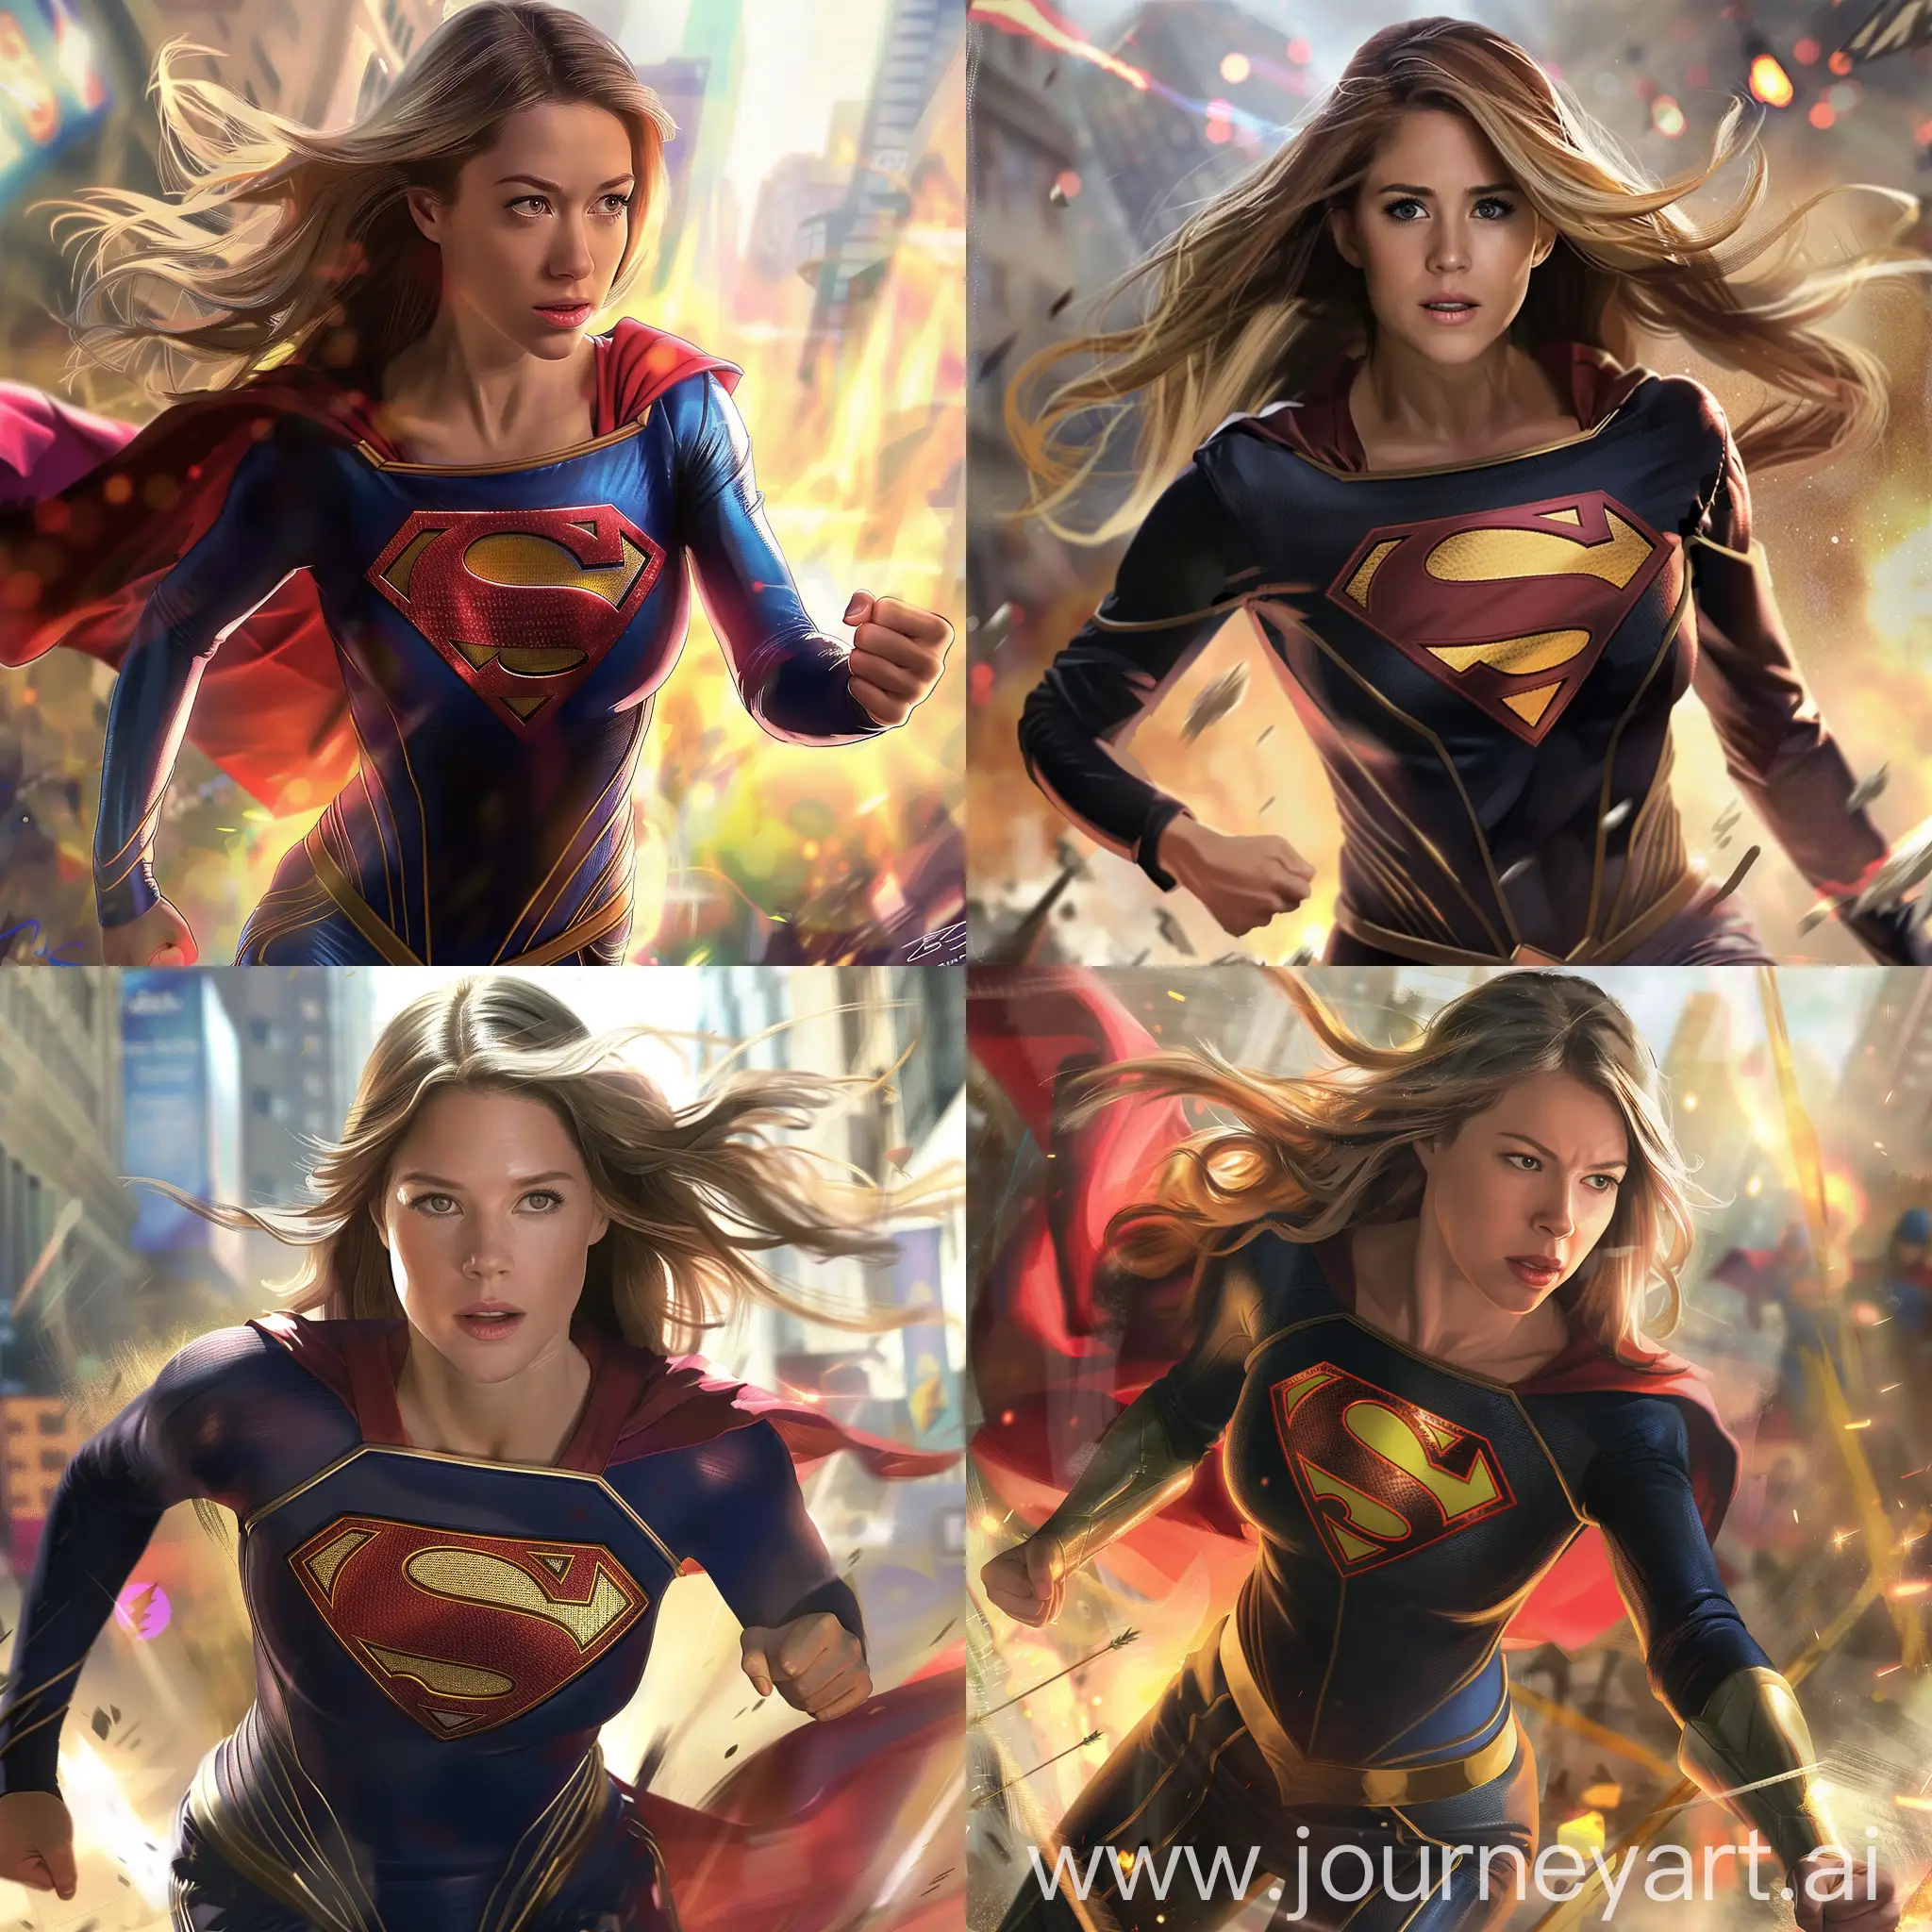 Sasha-Calle-as-Supergirl-in-Dynamic-Pose-from-The-Flash-Movie